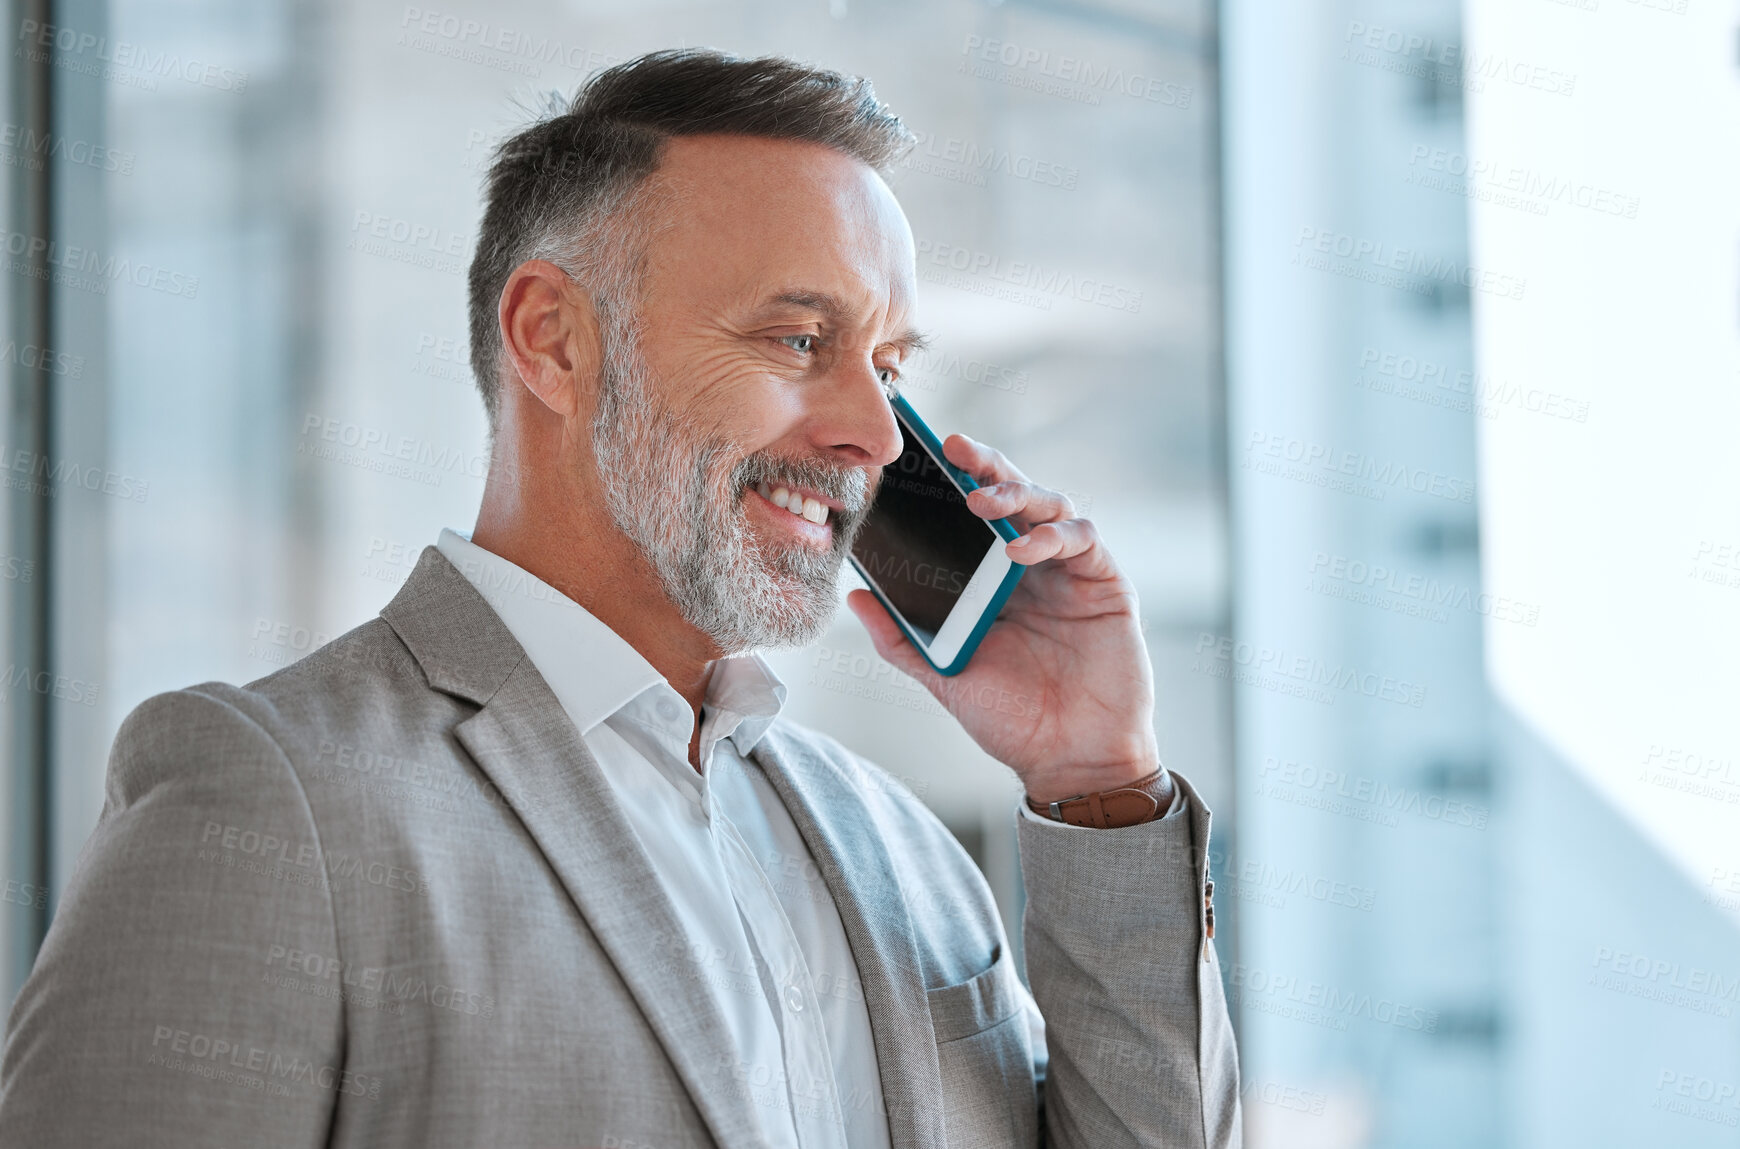 Buy stock photo Shot of a businessman on a call at work in a office